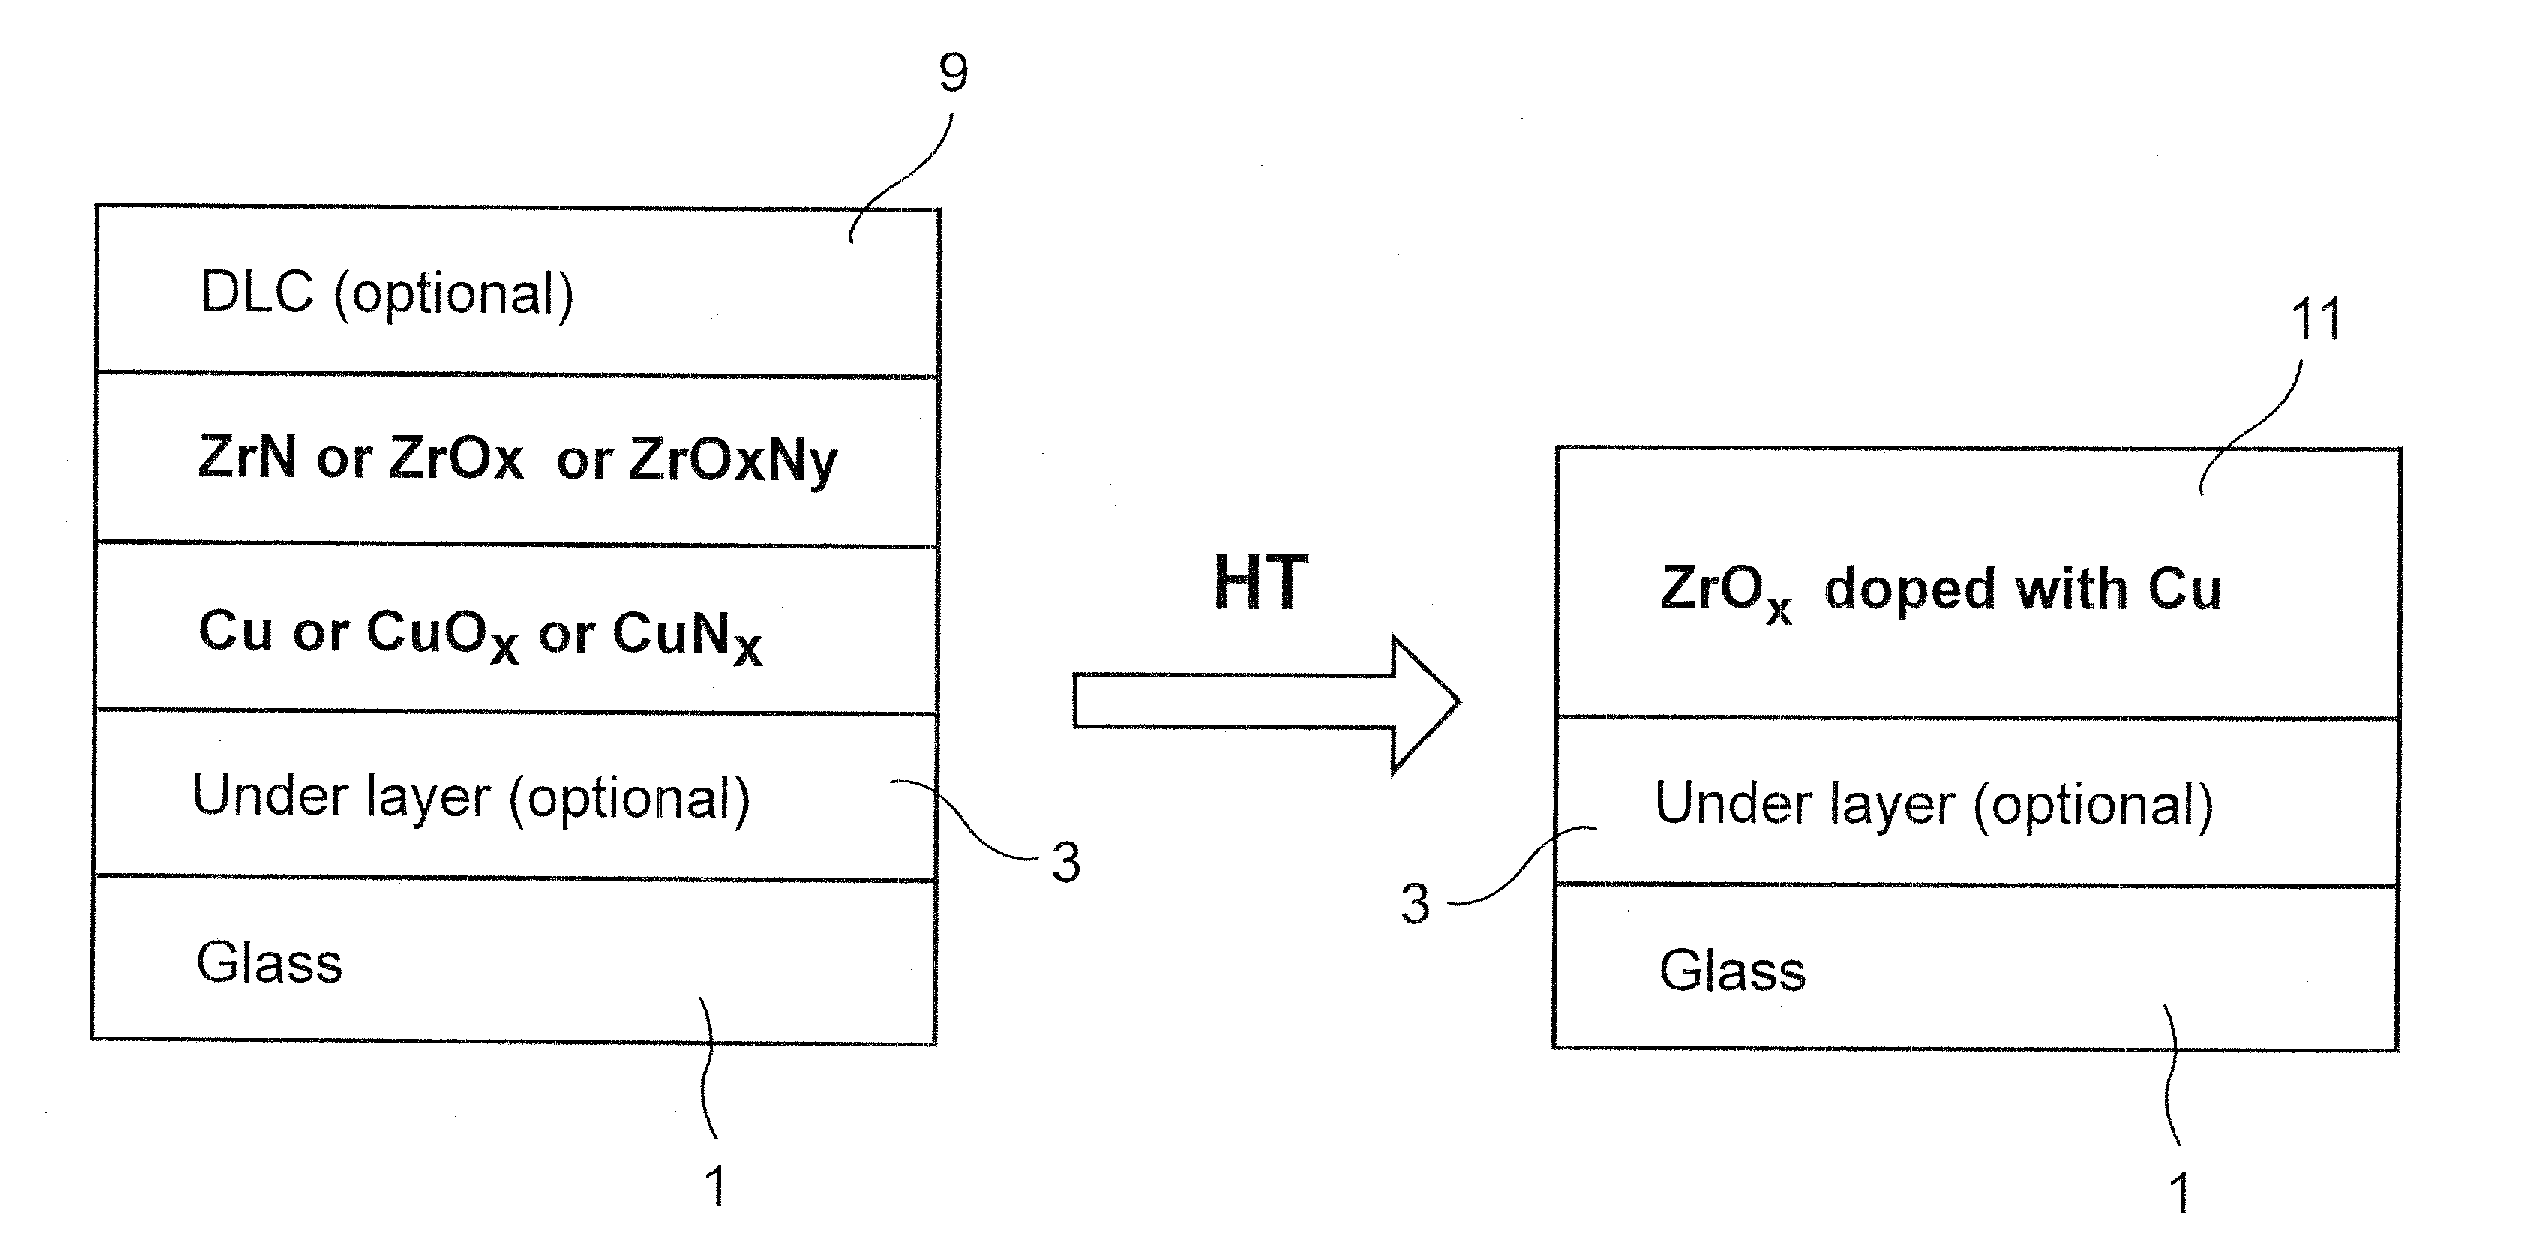 Heat treatable coated article with copper-doped zirconium based layer(s) in coating